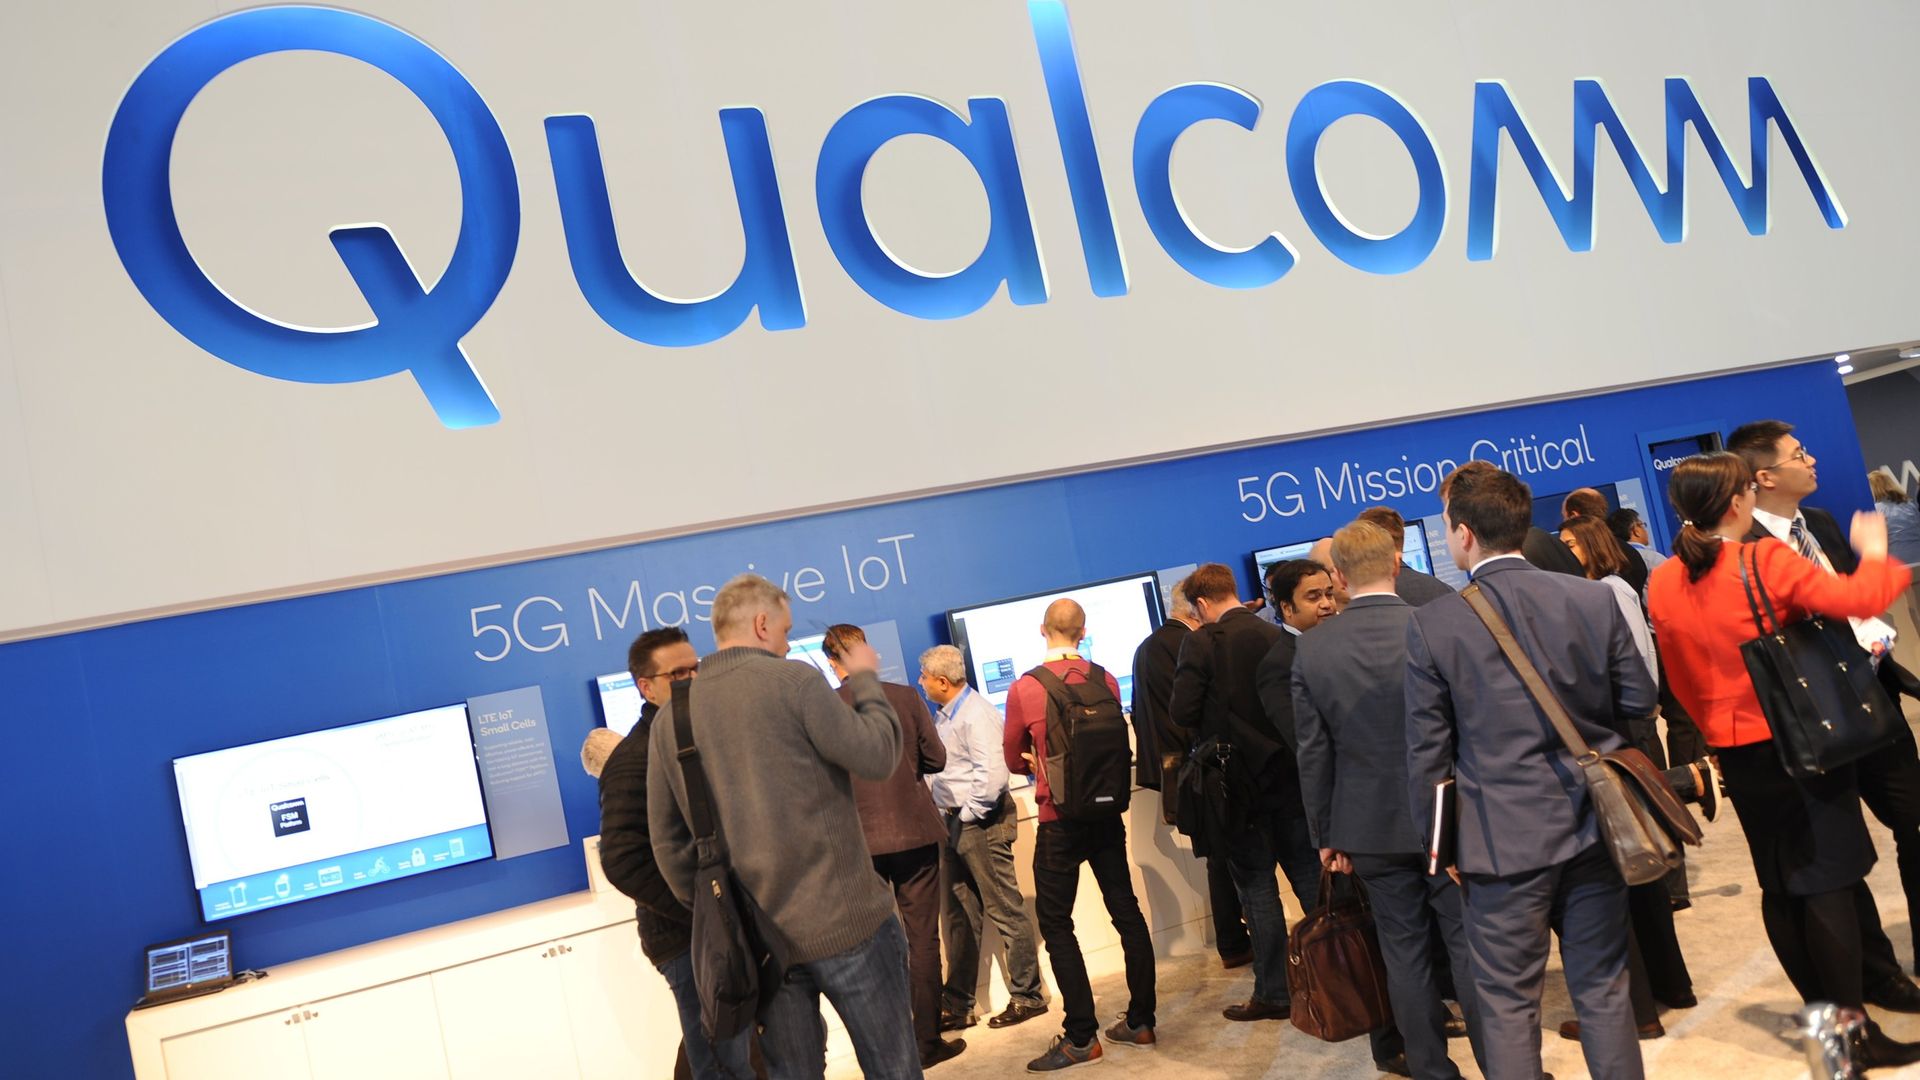 Qualcomm sign at a trade show 